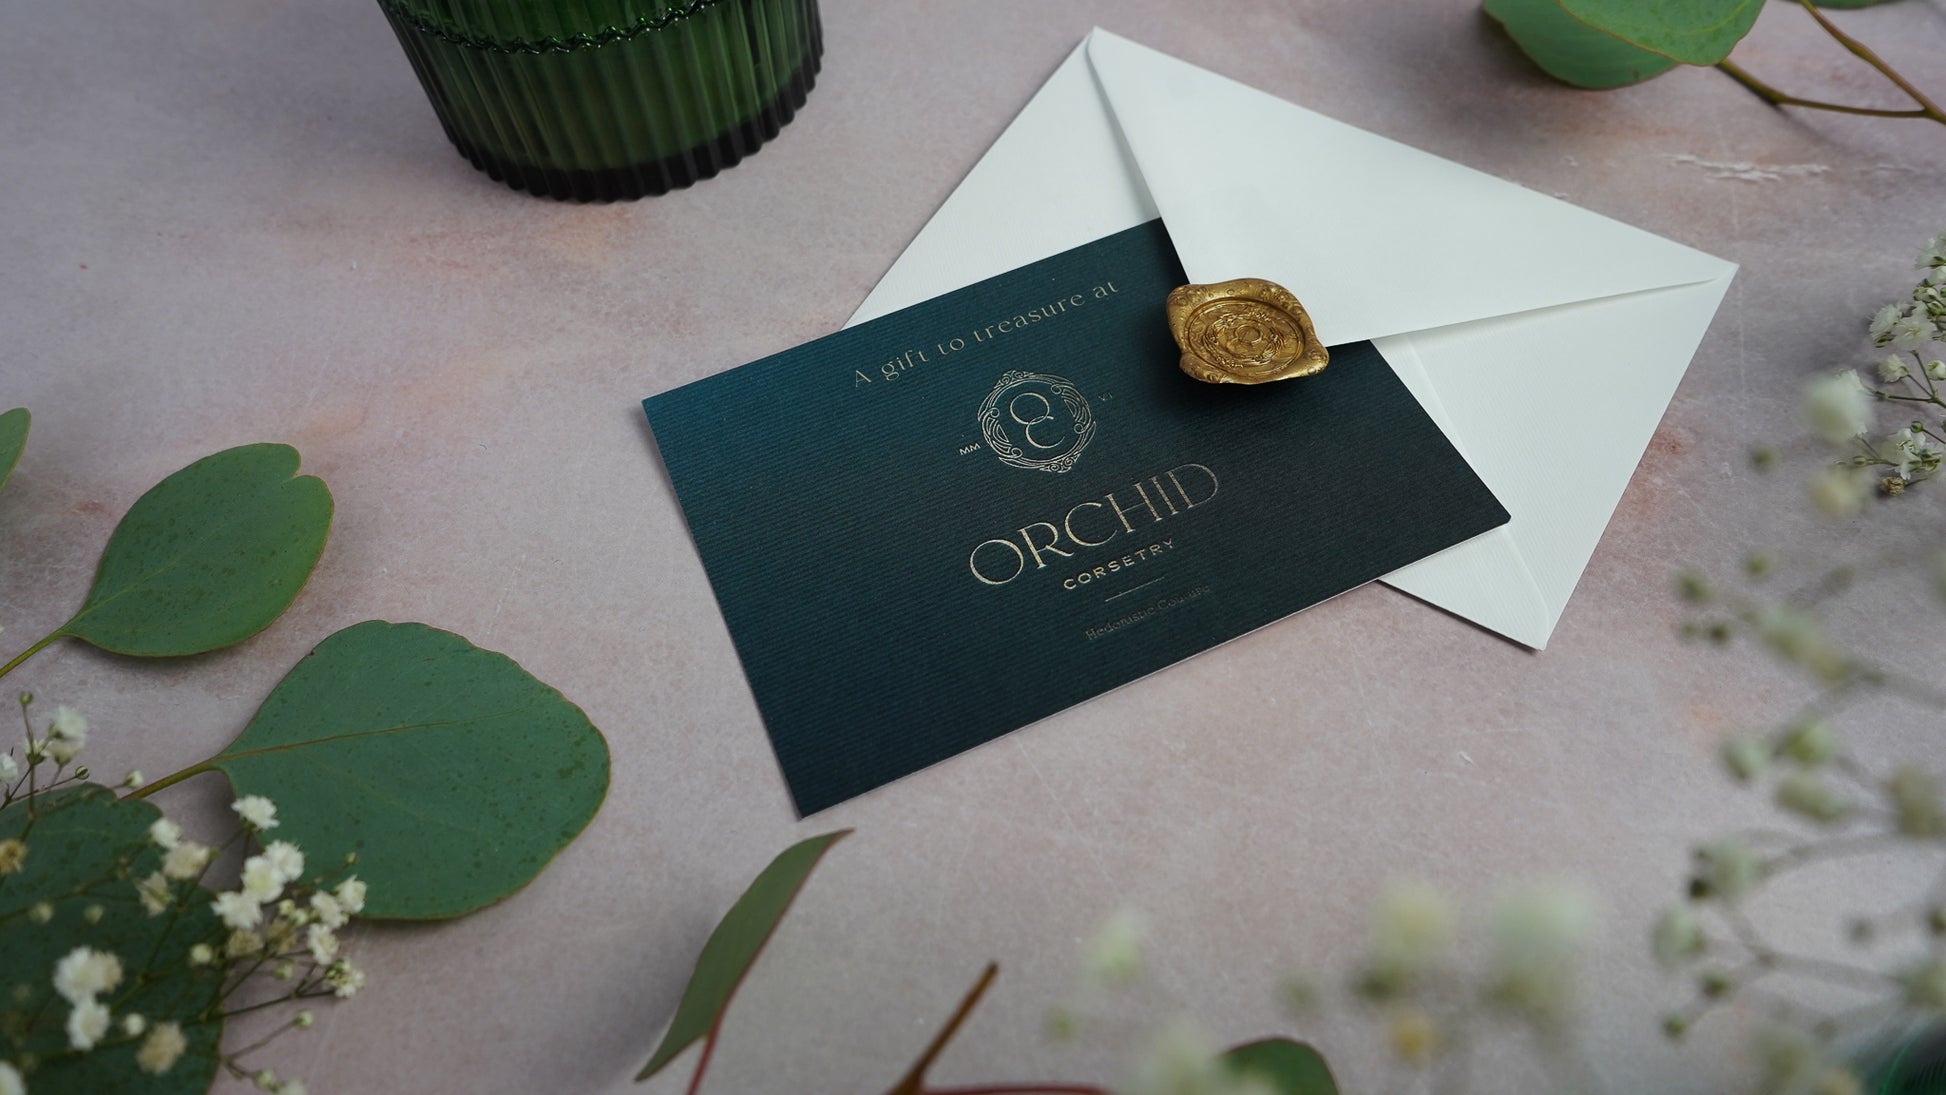 An Orchid Corsetry gift card with a gold wax sealed envelope